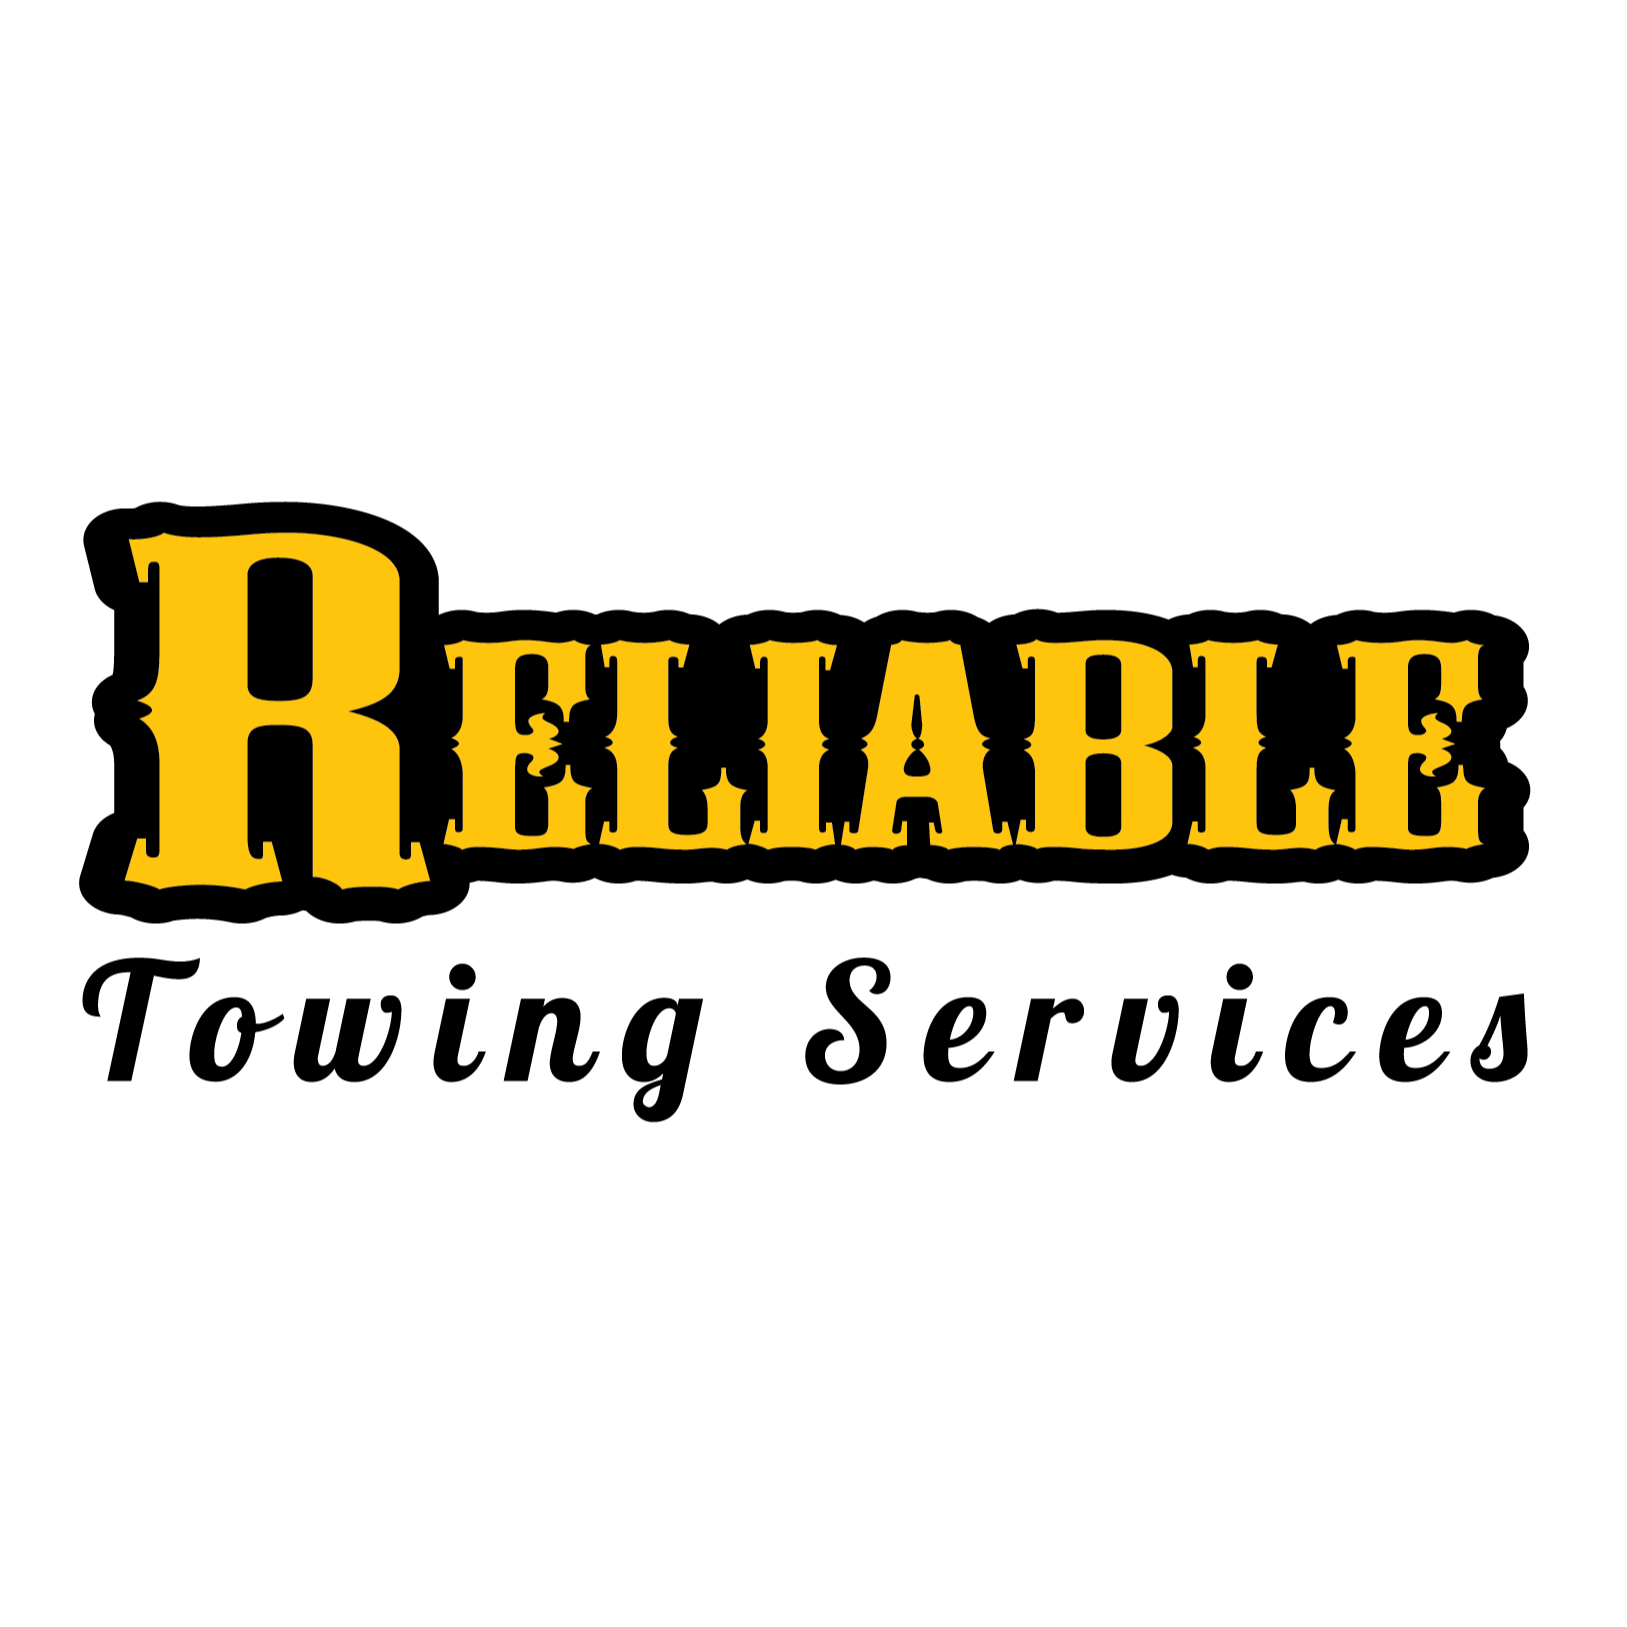 Reliable Towing Services Logo